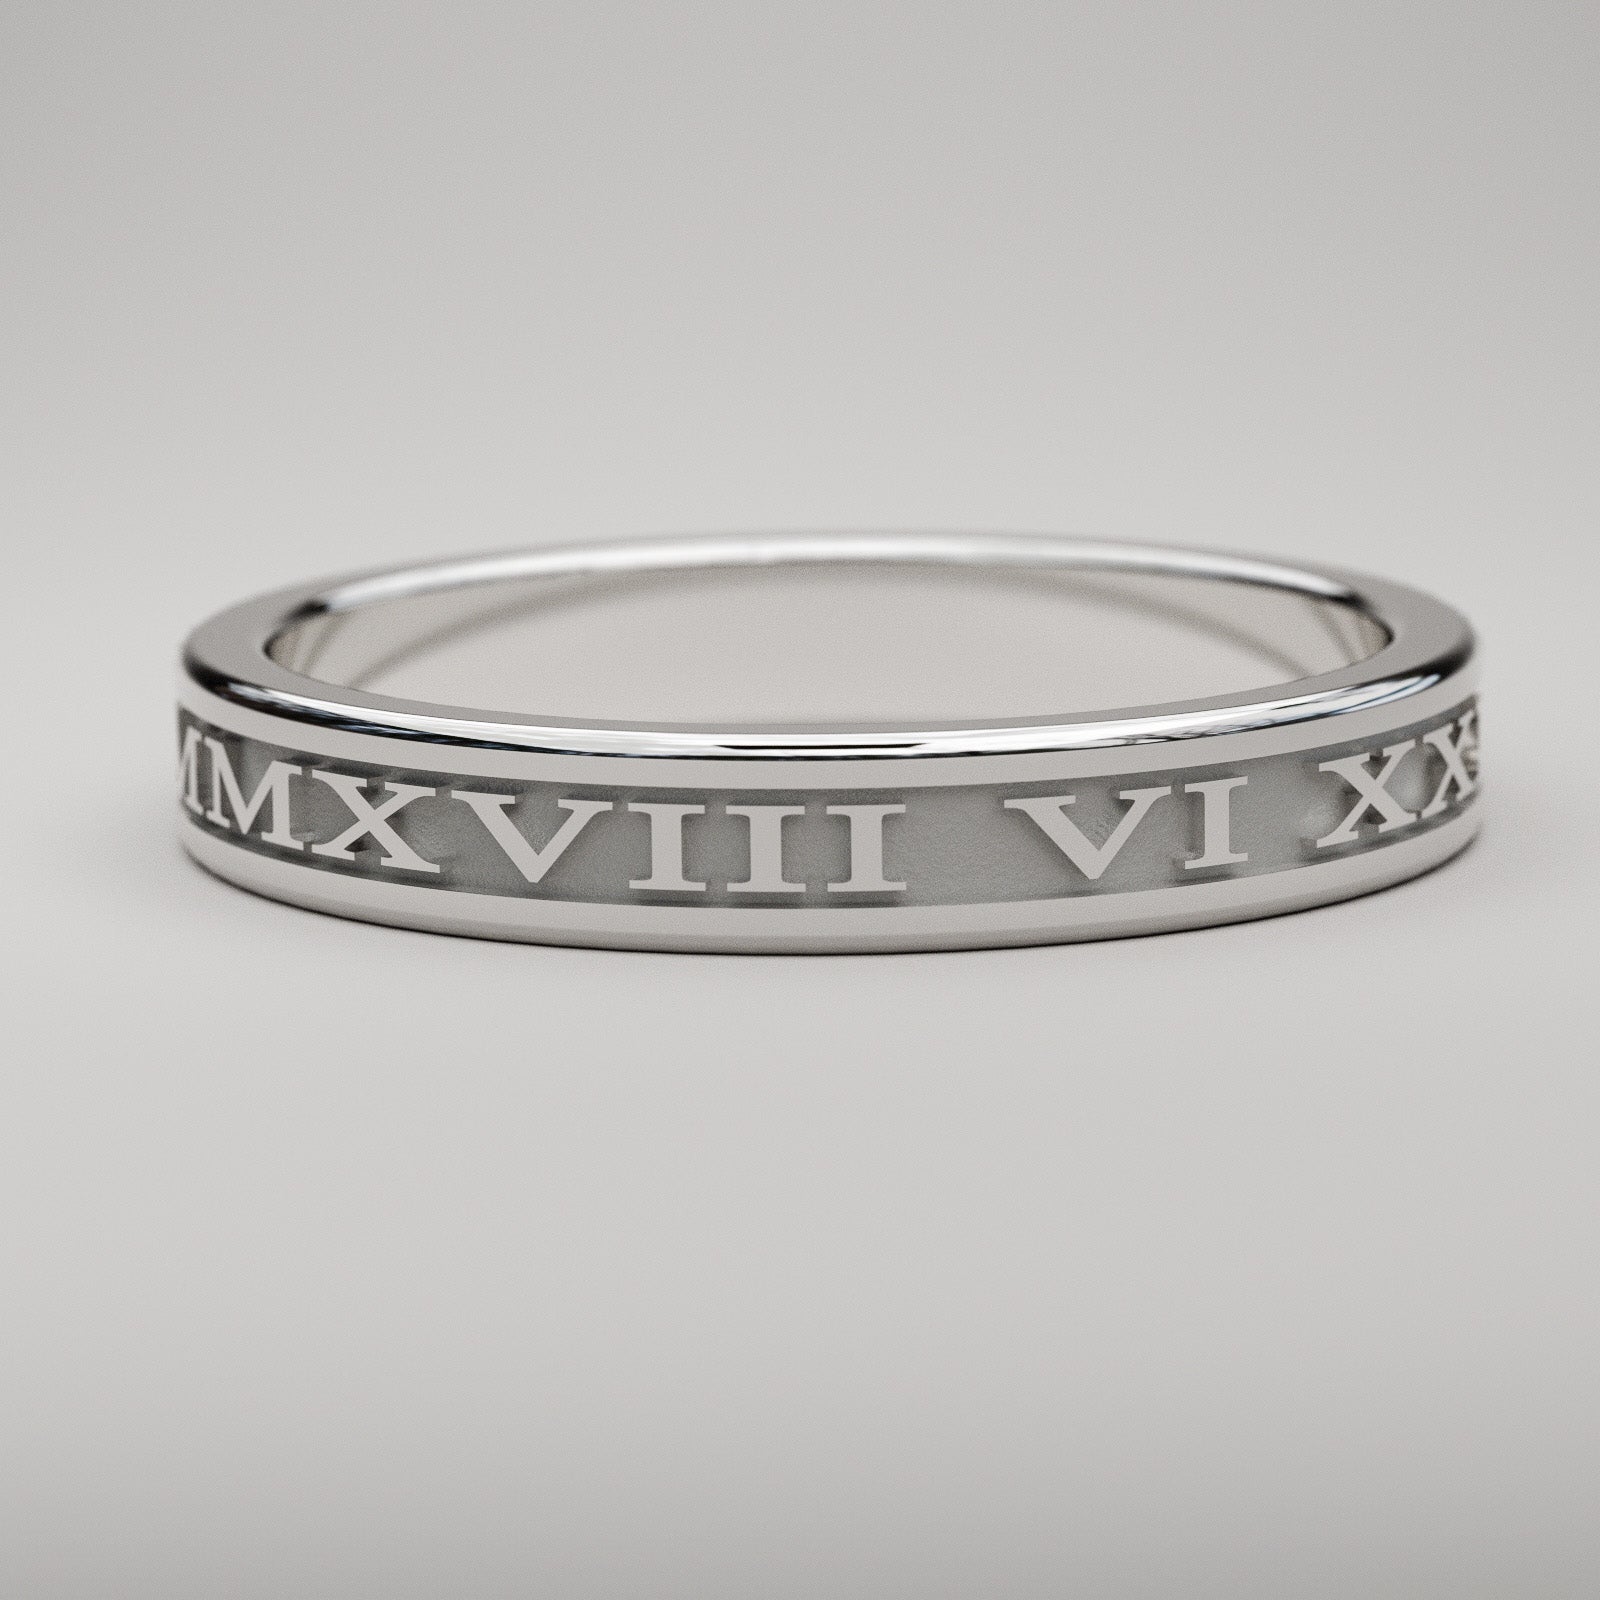 Custom date Roman Numeral ring in solid white gold, 3mm wide